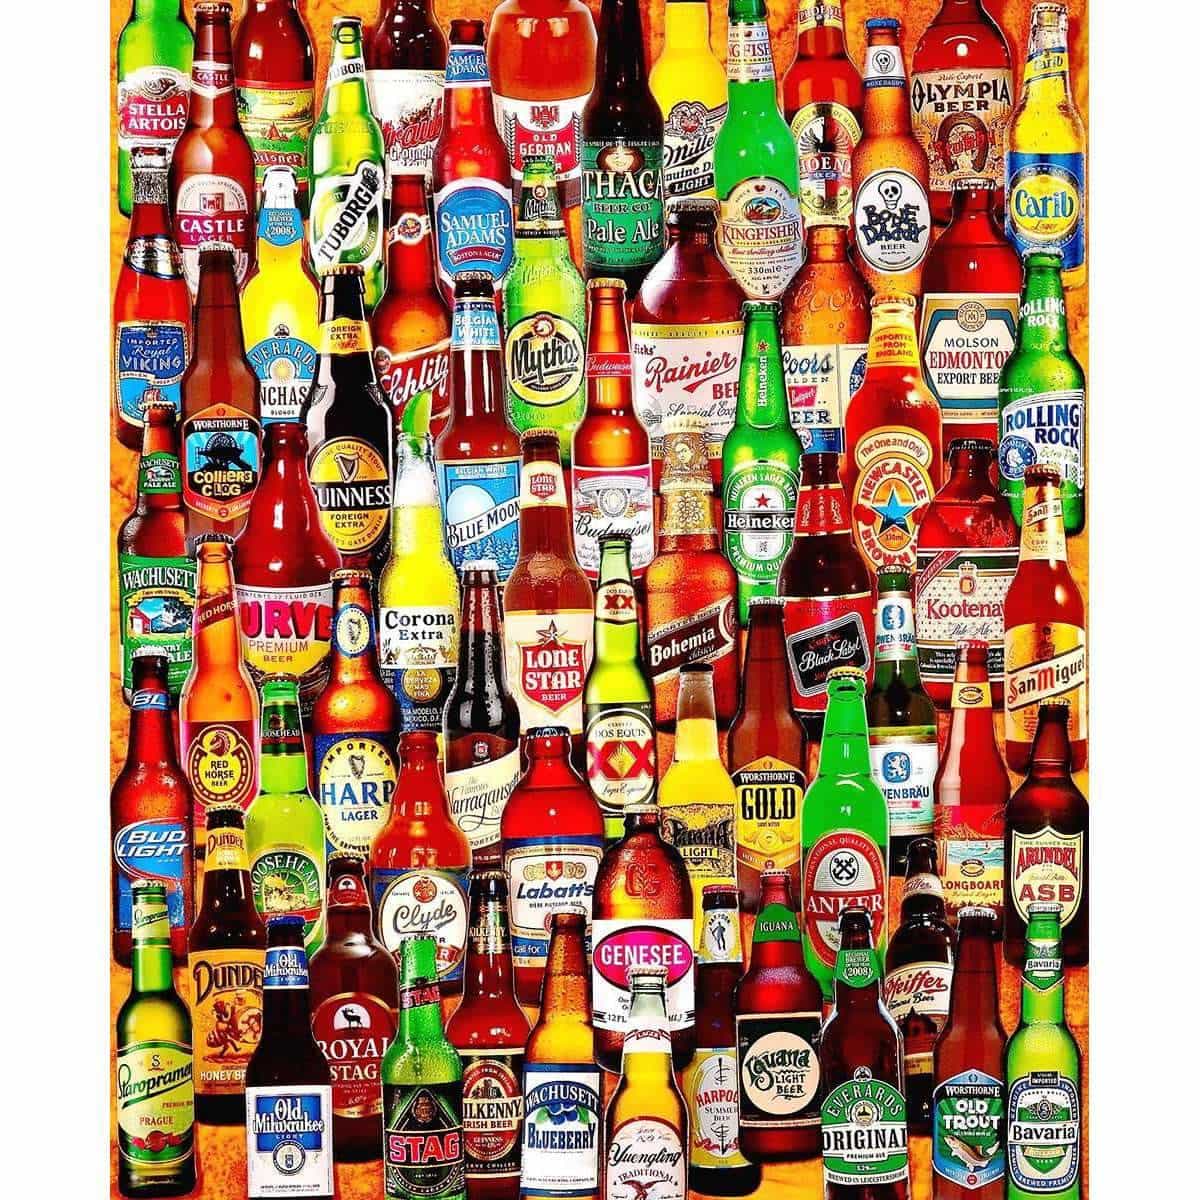 99 Bottles of Beer on the Wall Puzzle